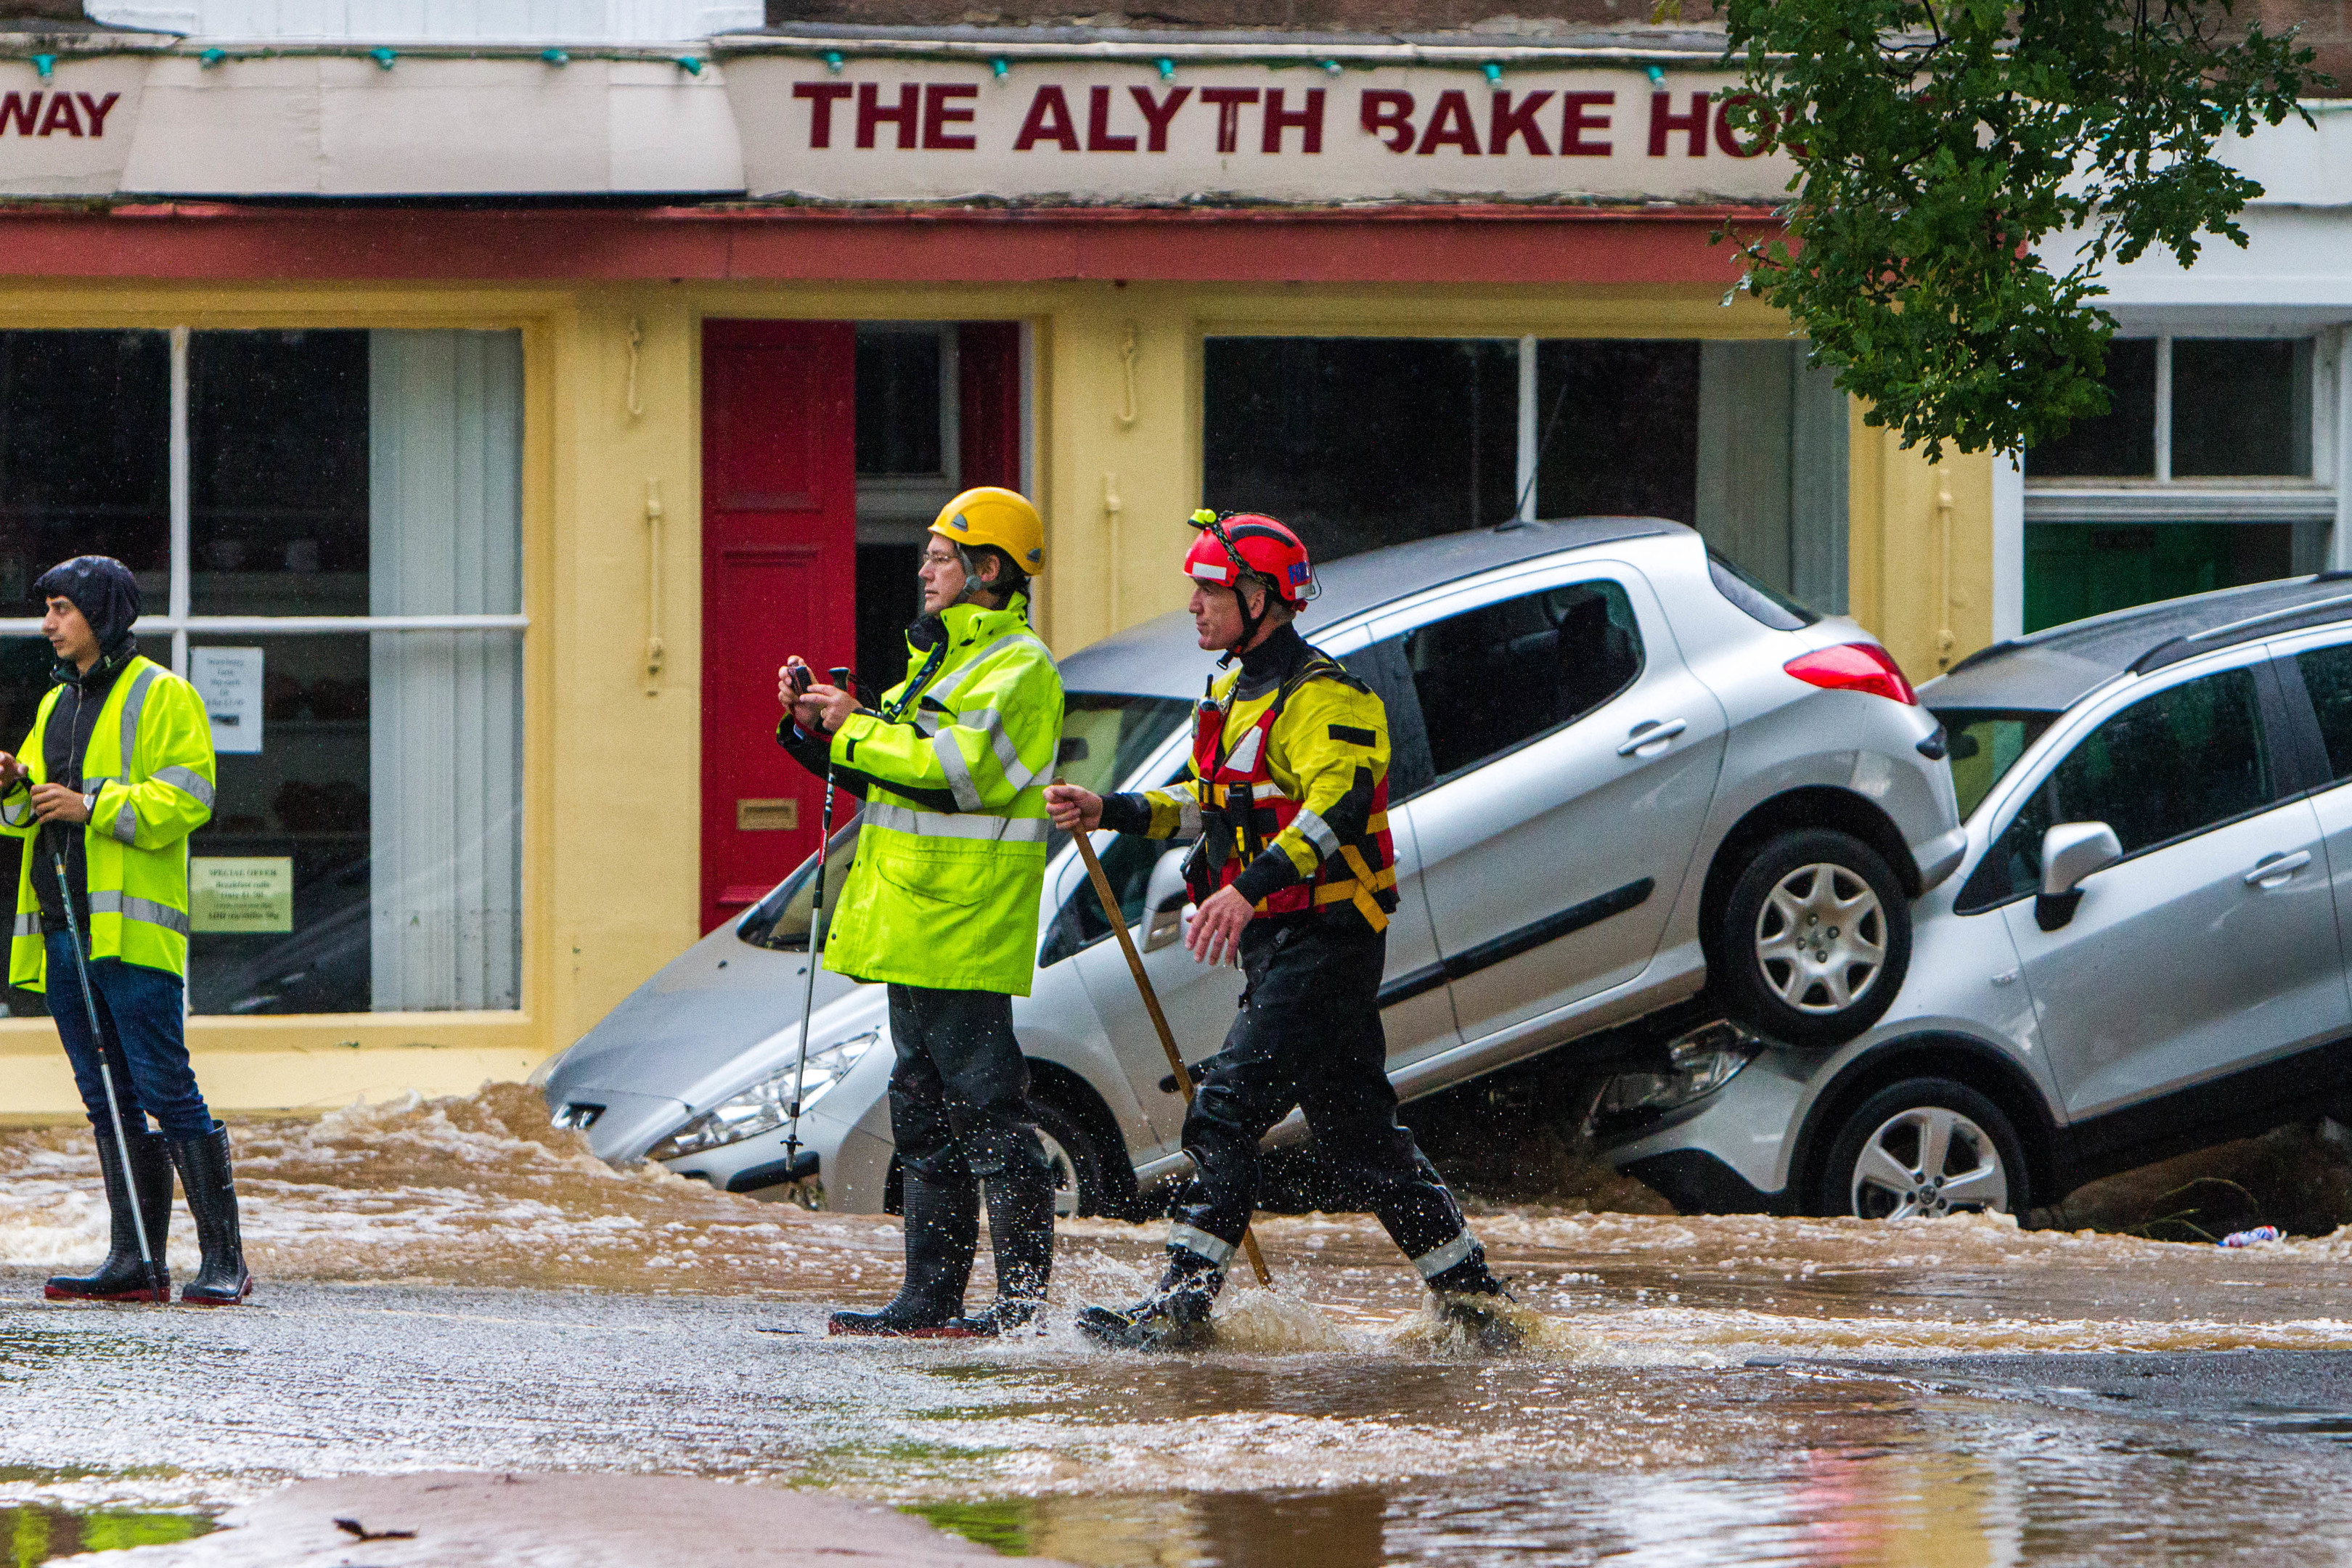 Flooding in Alyth sparked a major rescue and relief operation.